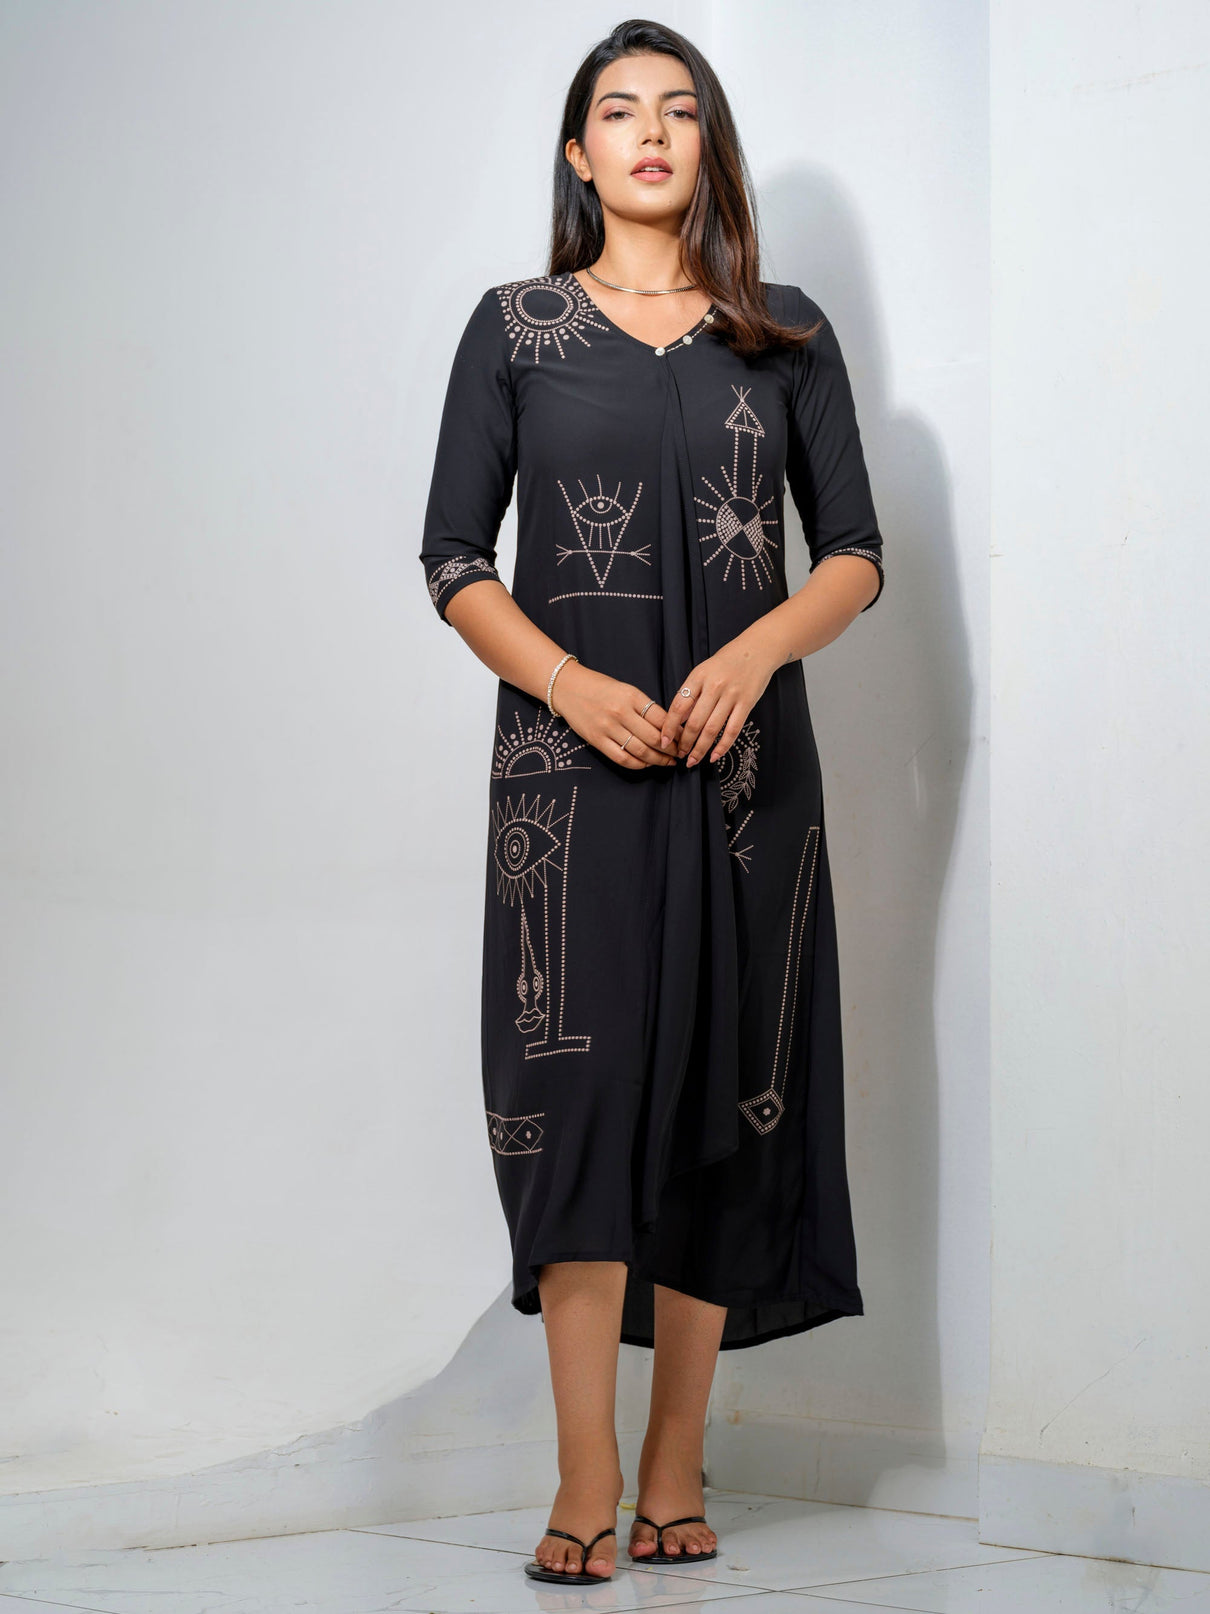 Solid colored dress with yoke embellishment with Dori embroidery Etiquette Apparel